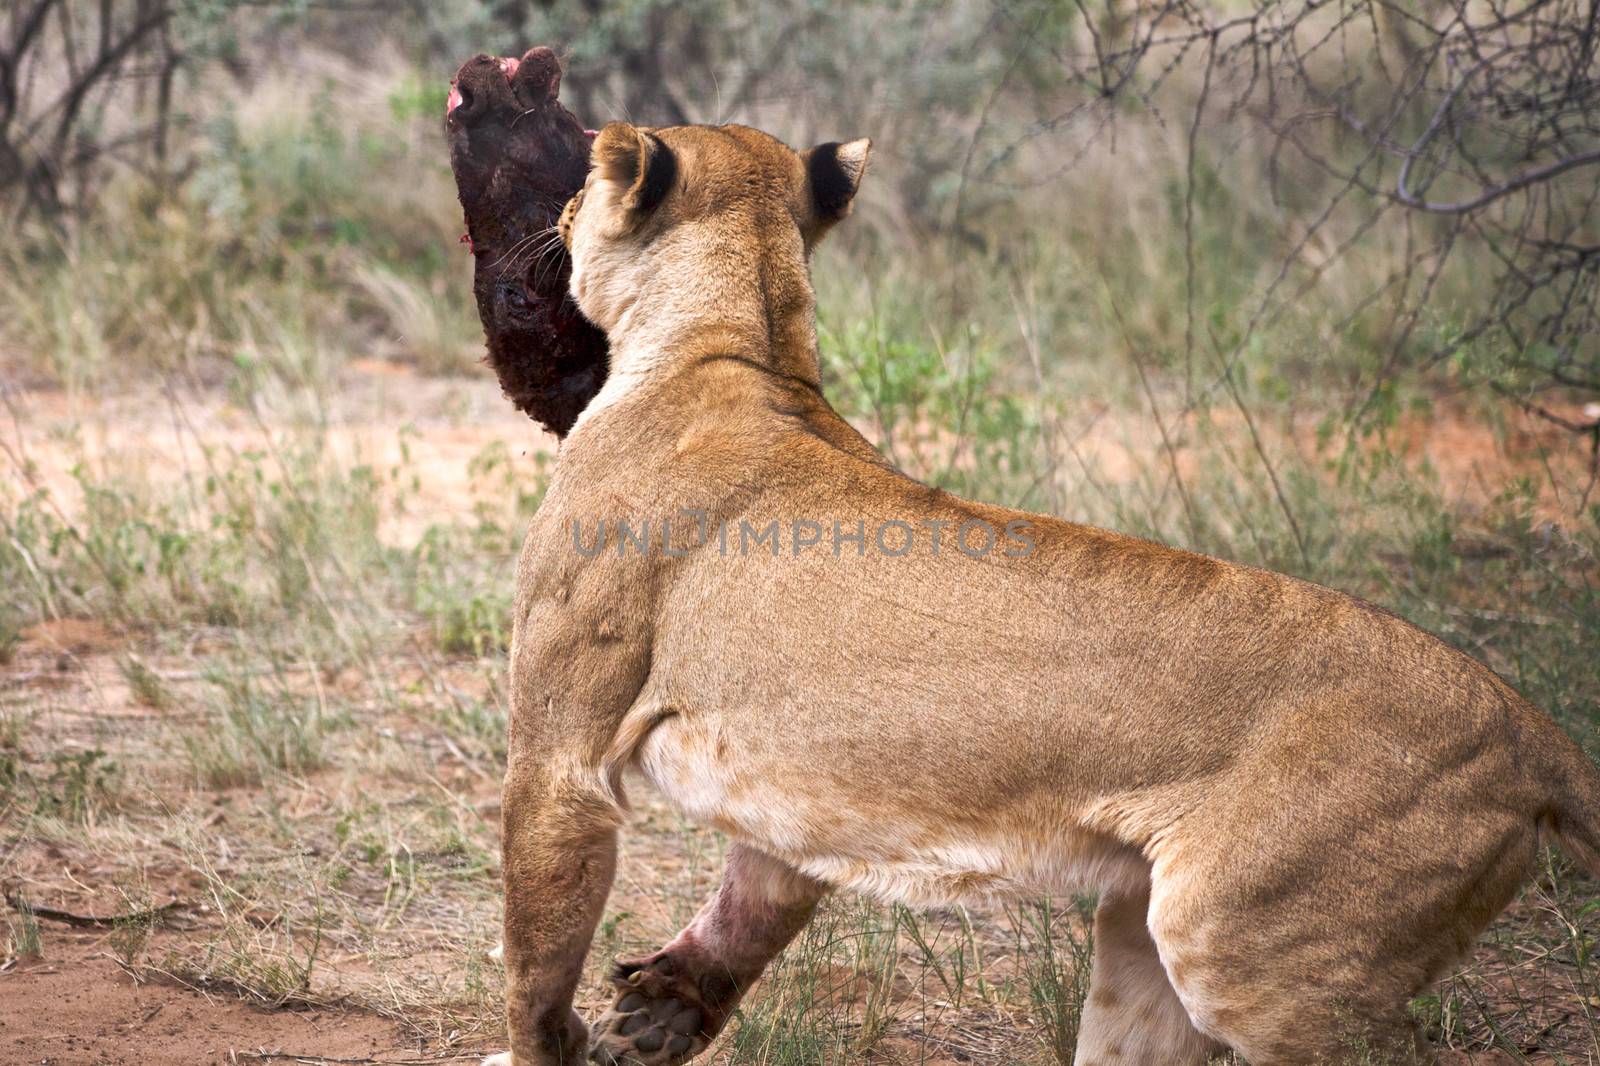 The lion is walking with a big piece of meat.Kgalagadi Transfrontier Park. South Africa